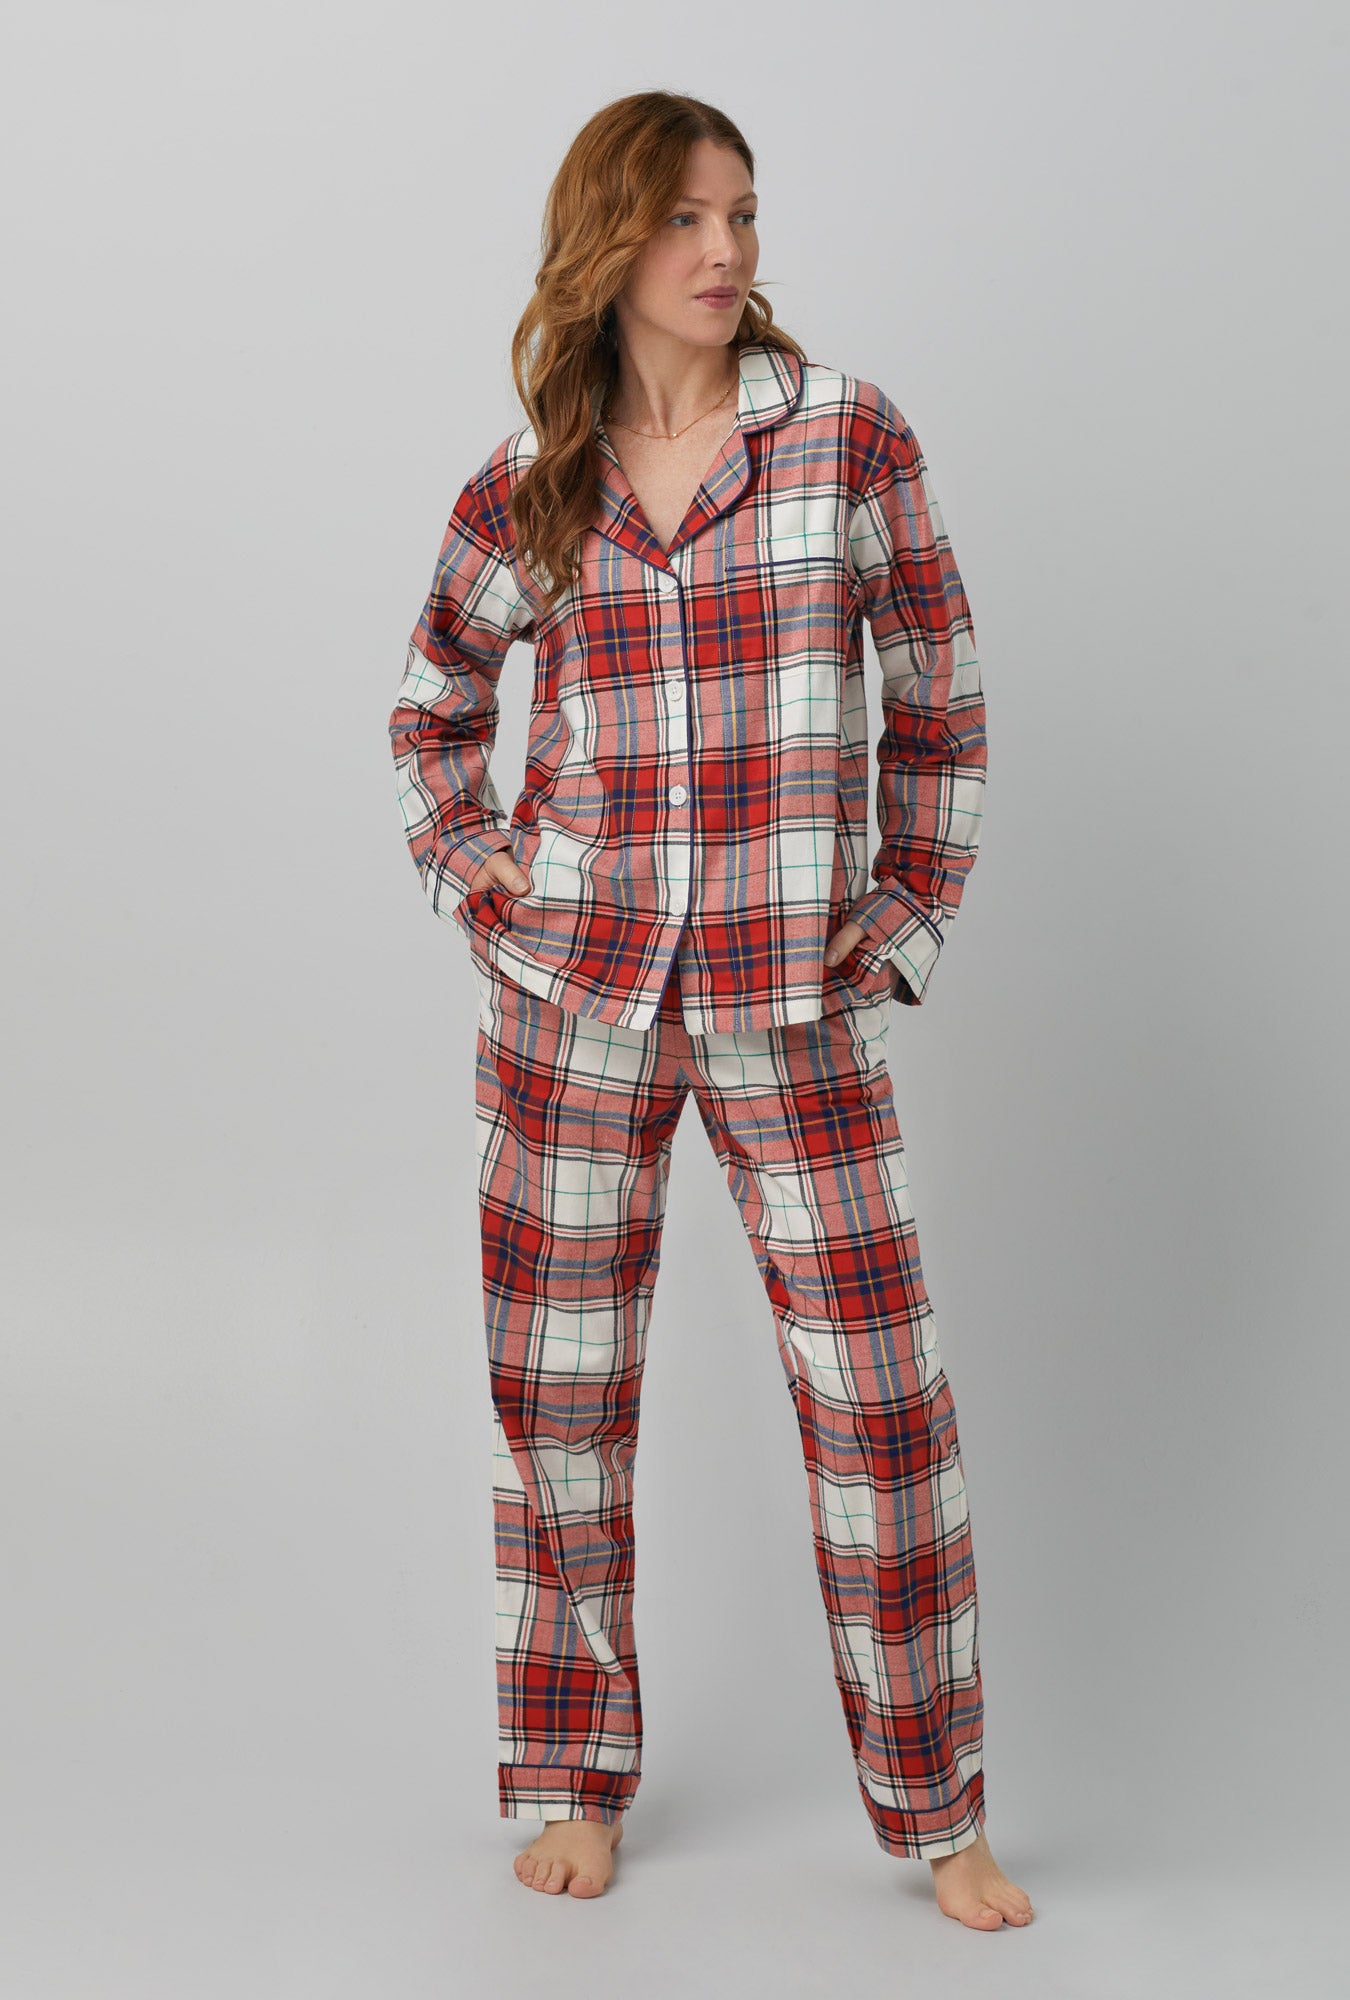 A lady wearing red Long Sleeve Classic Woven Cotton Portuguese Flannel PJ Set with Festive Tartan print